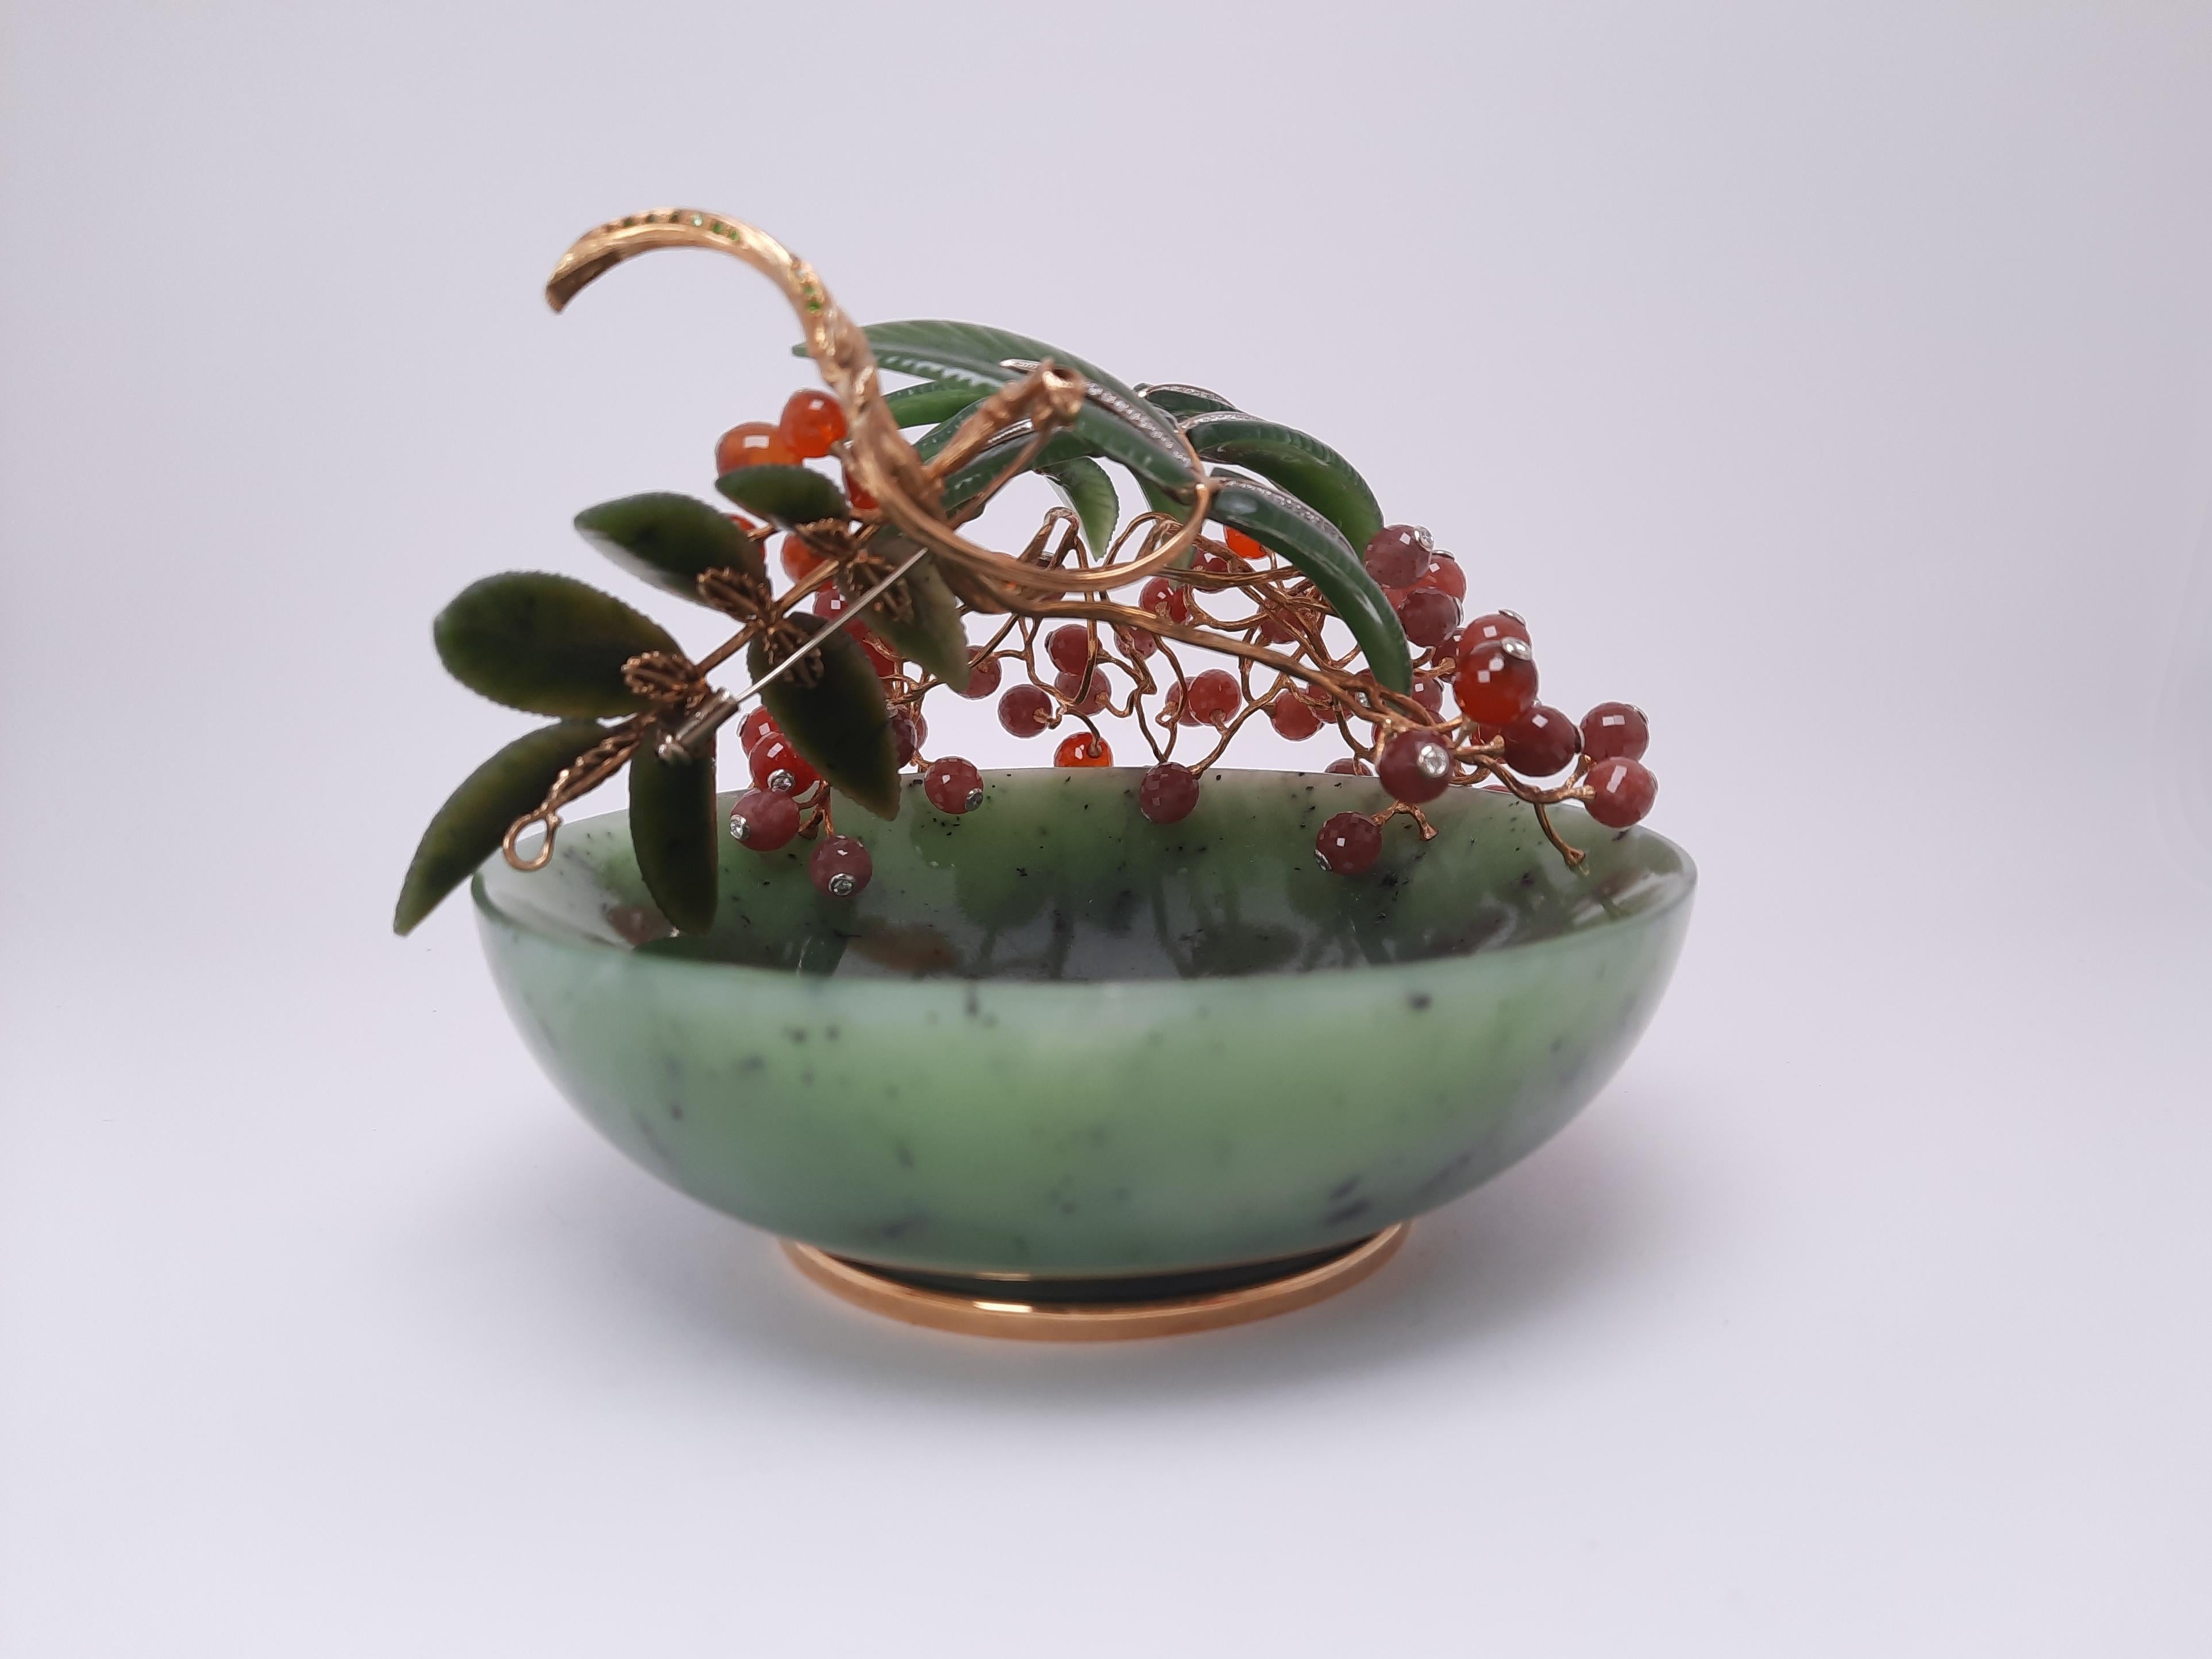 An interior jewellery art object, Rowan berry, handmade by MOISEIKIN🄬 was created as a gift to preserve harmony, happiness in the family and a cordial relationship with each other. The carved Ural Nephrite base is covered with juicy Rowan berries